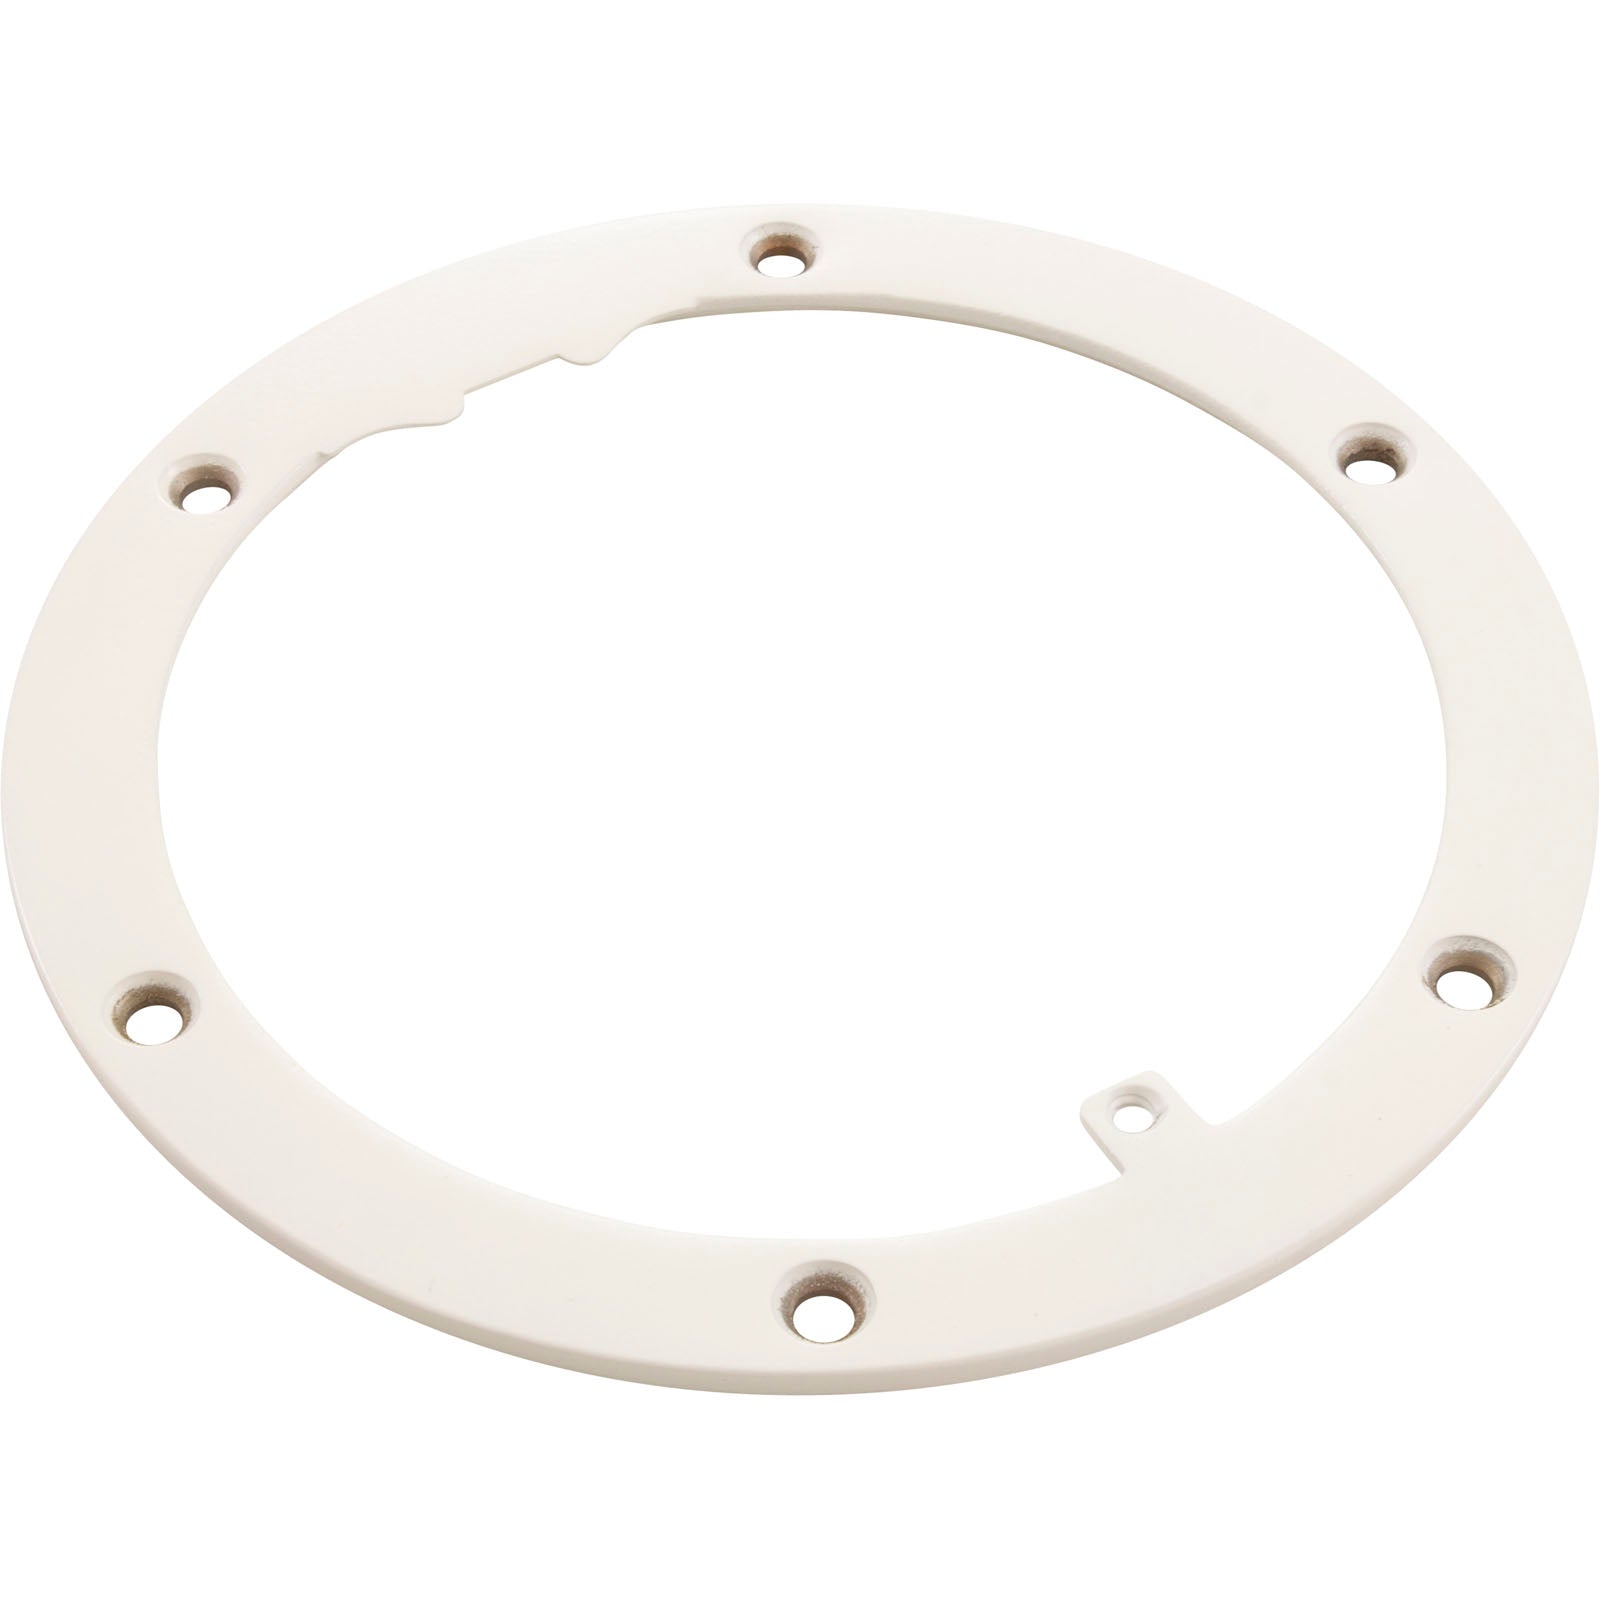 Ring Seal Spa Pwdr White Tp 79206055